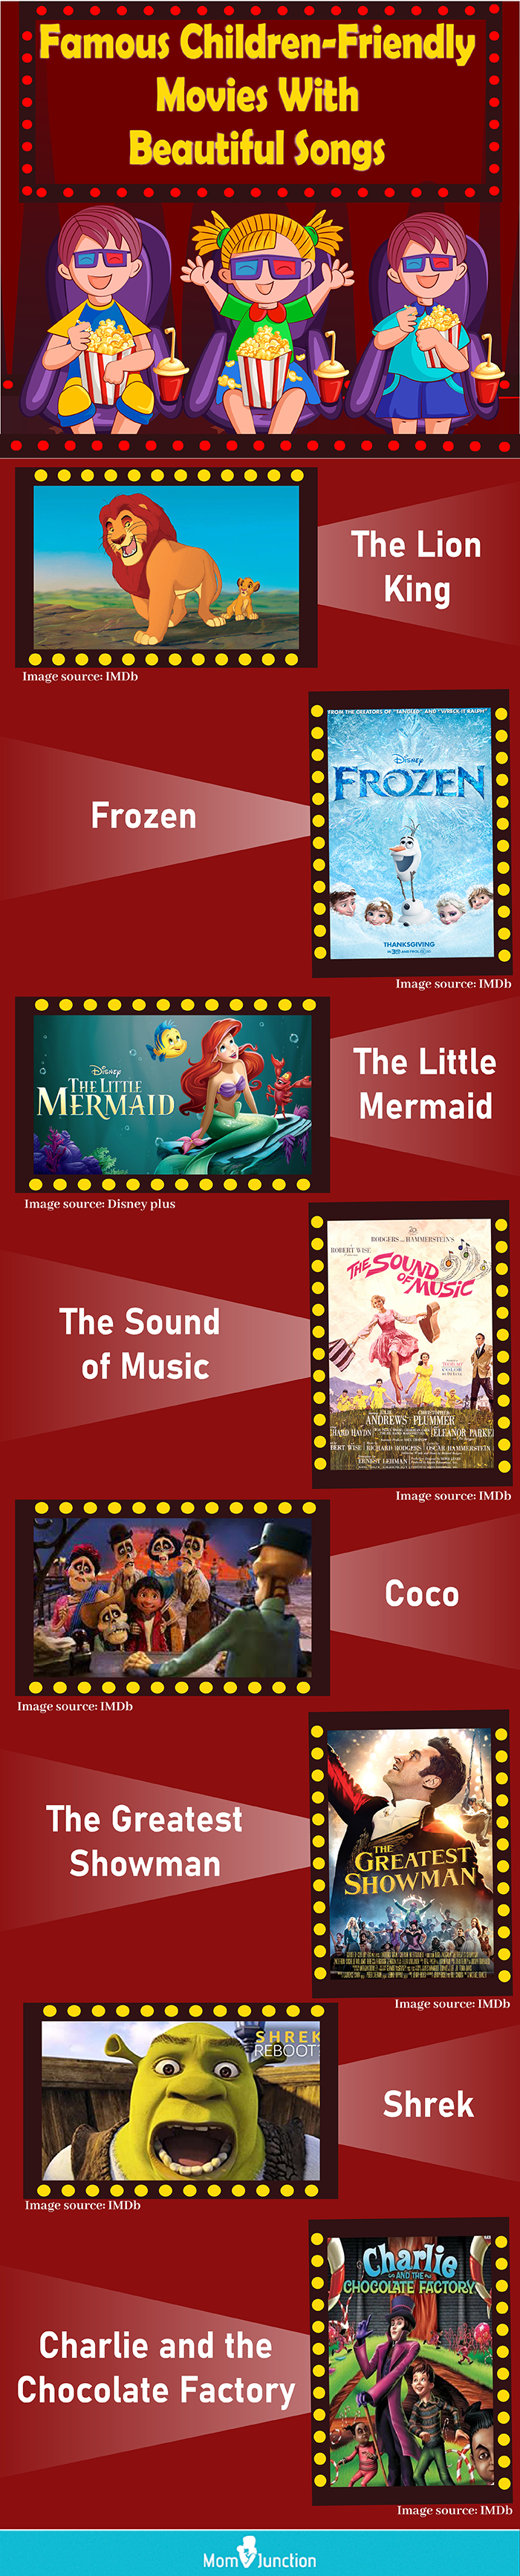 famous children friendly movies with beautiful songs (infographic)